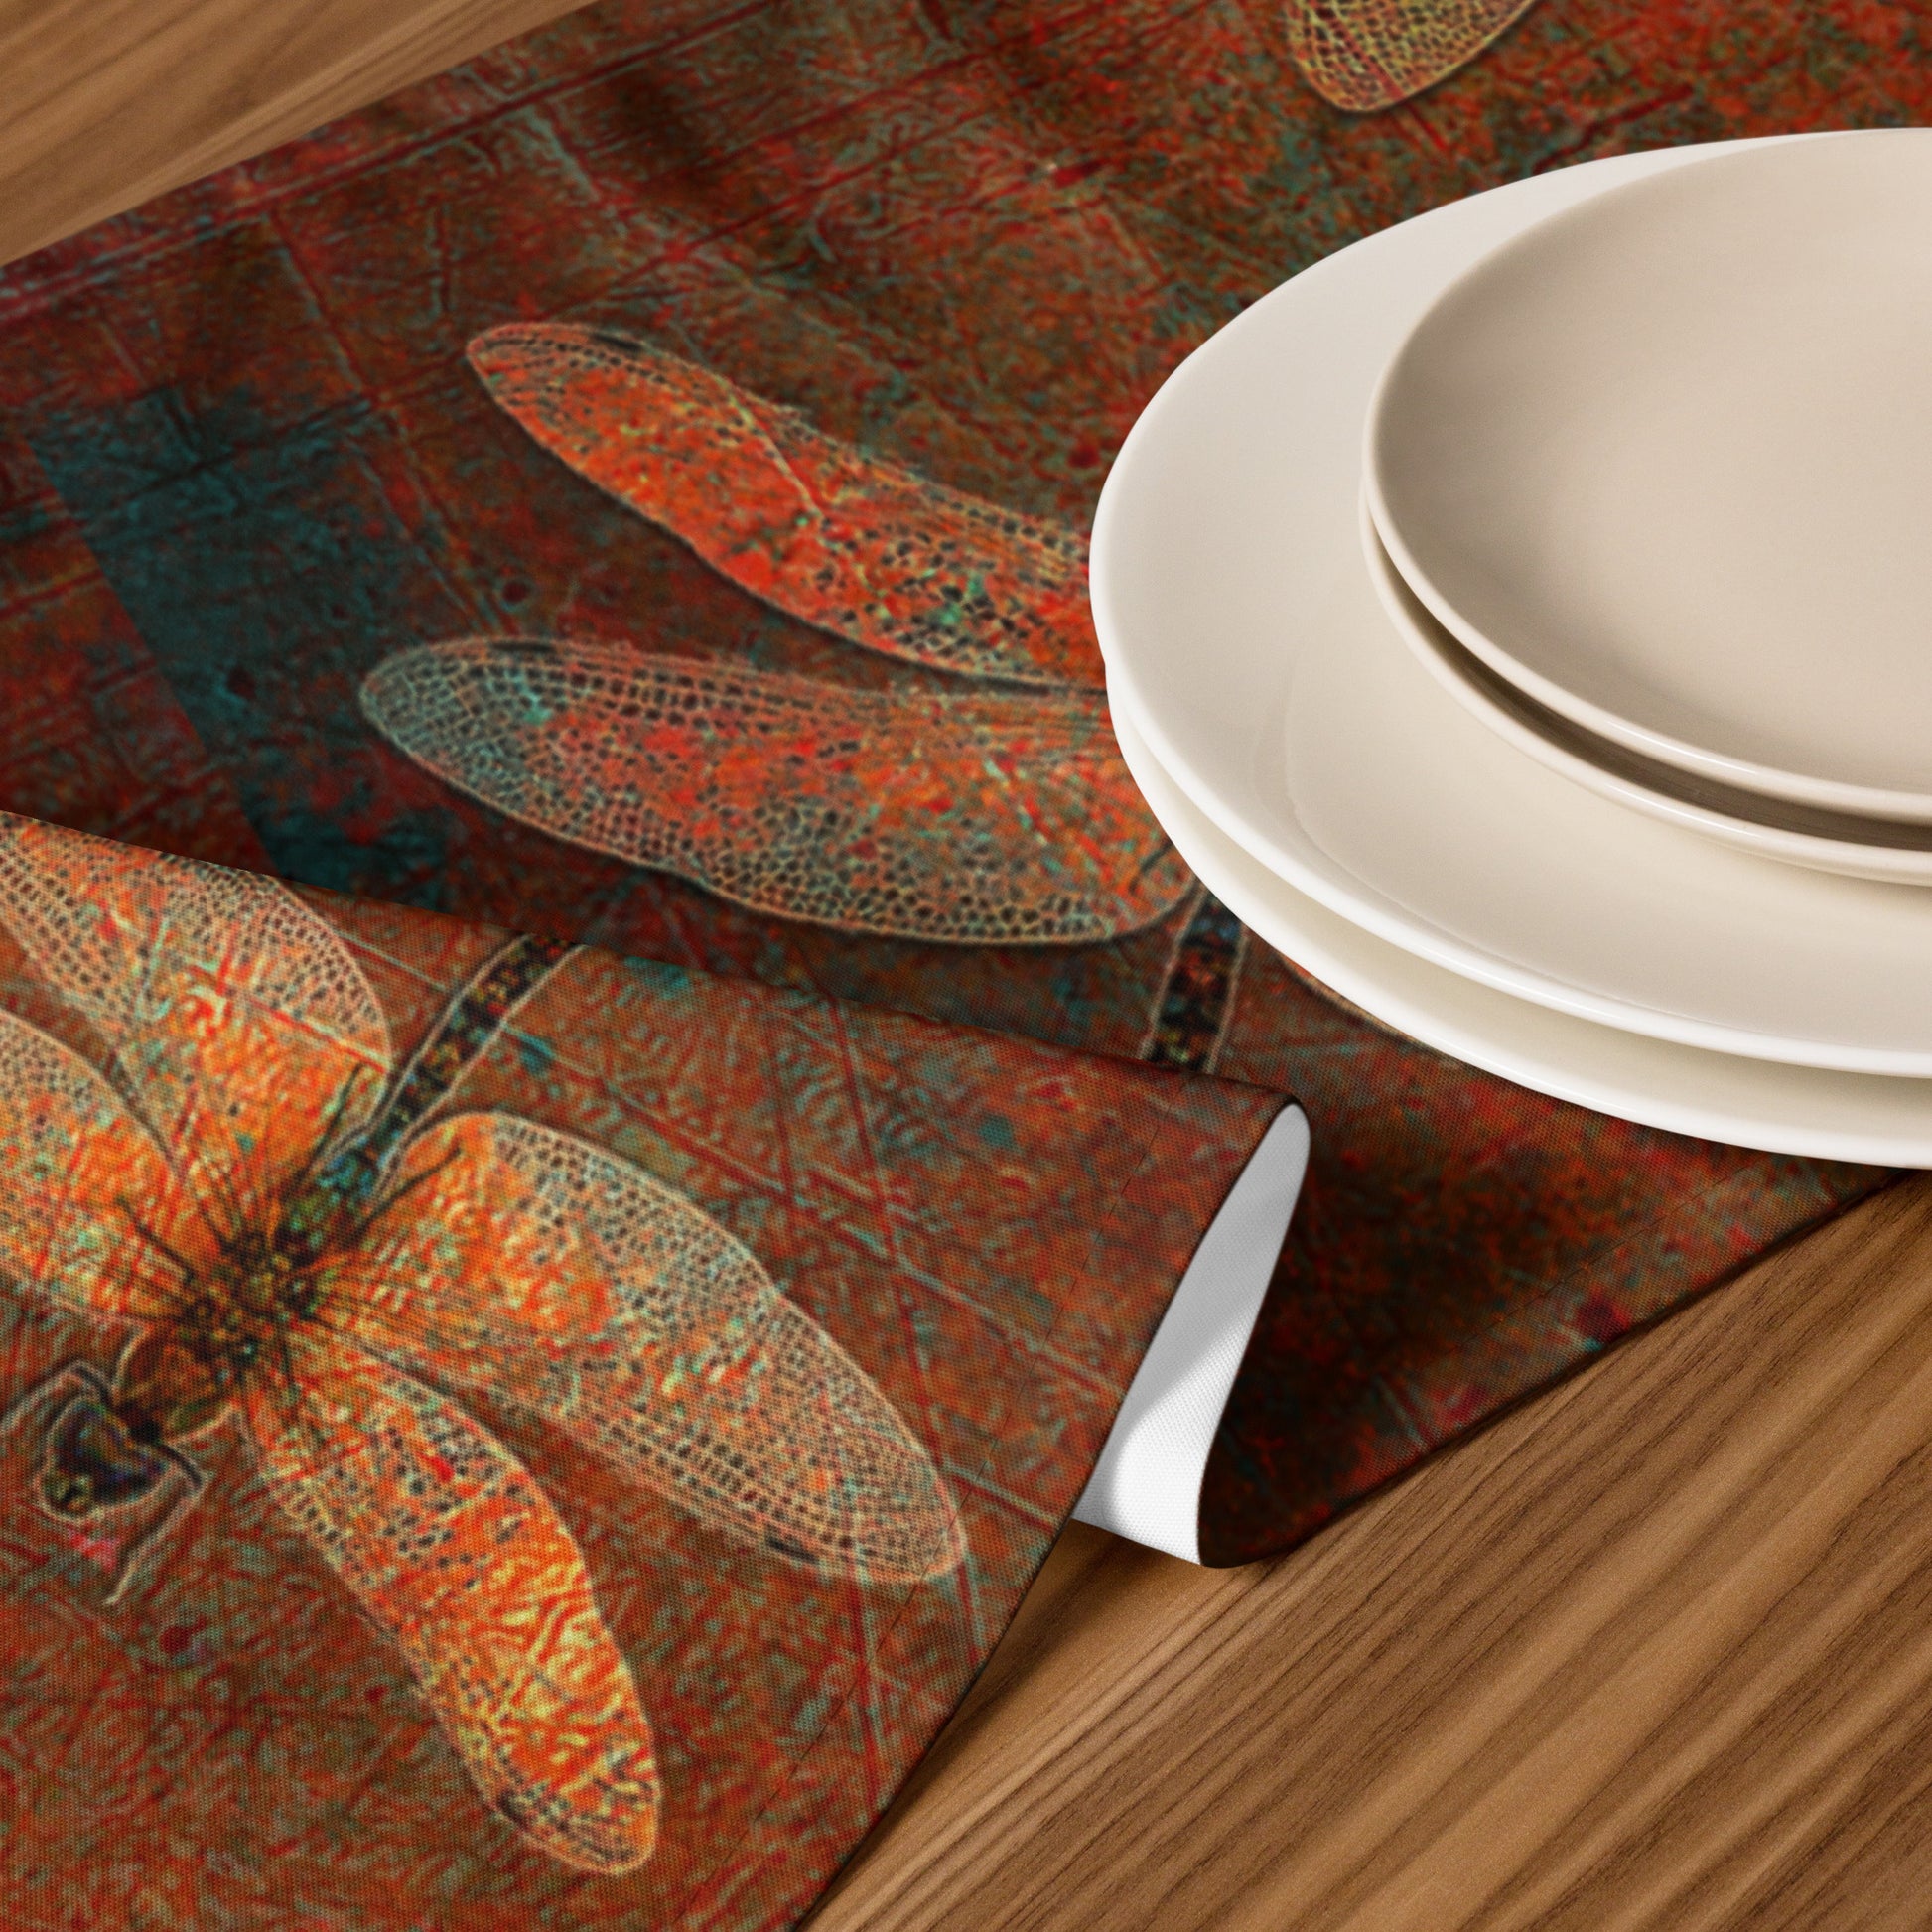 Golden Dragonflies on Orange and Green Background Table runner with plates